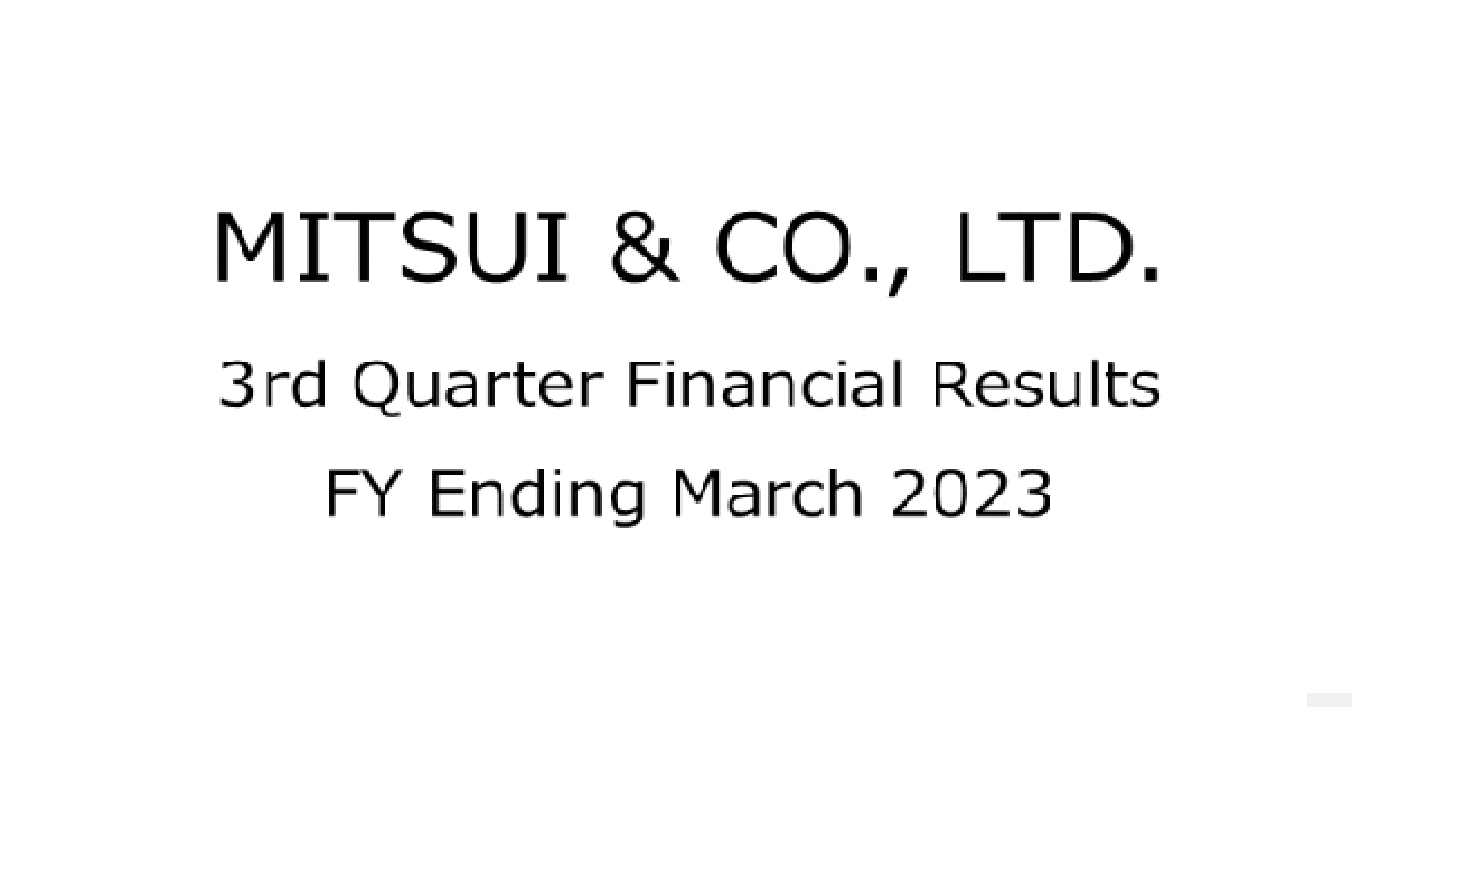 3rd Quarter Financial Results FY Ending March 2023